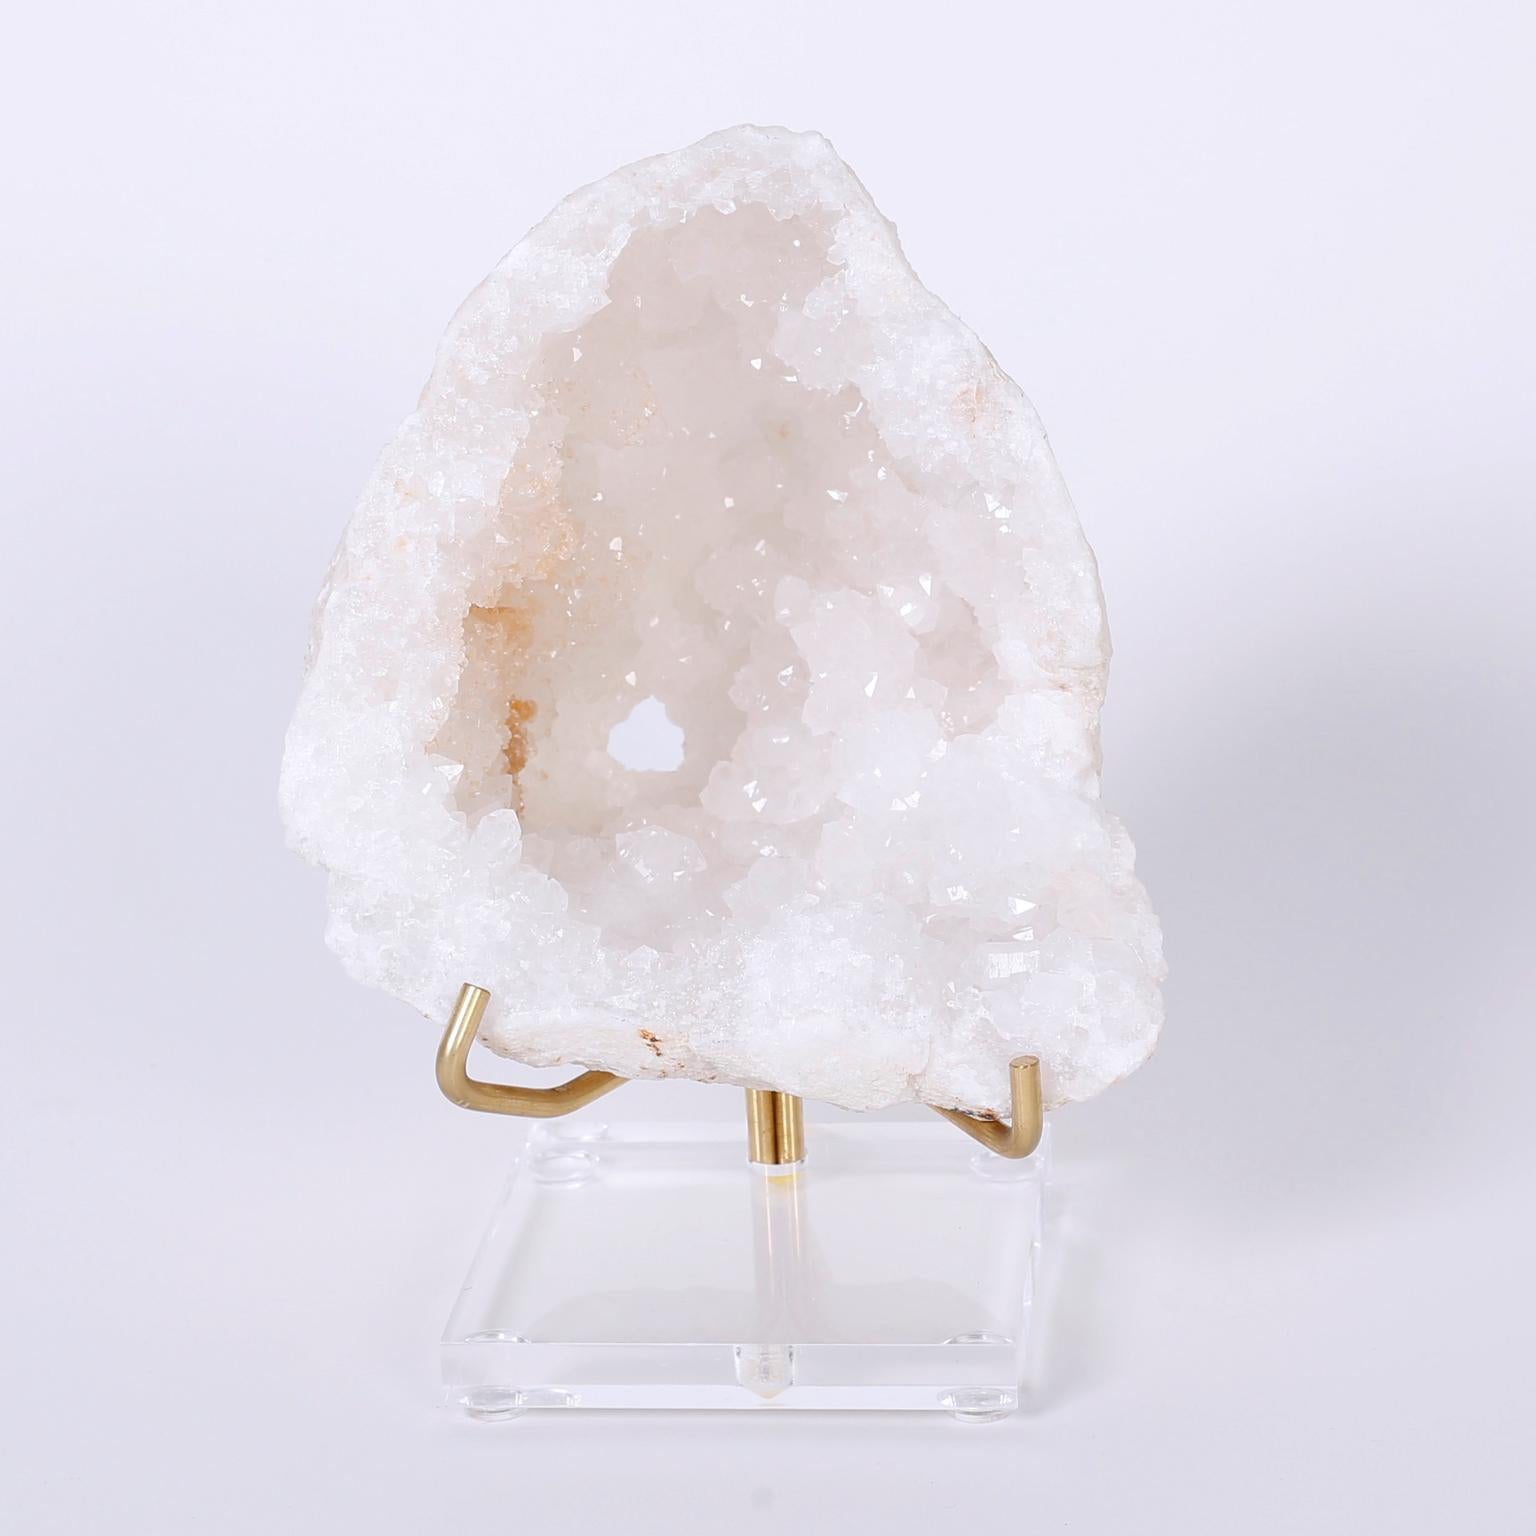 Quartz geode split into two specimens presented on Lucite and brass
stands to enhance the alluring geological spectacle.
Priced individually.

Dimensions:
Left: H: 8 W: 5.5 D: 5 $495.00
Right: H: 6.5 W: 5.5 D: 5 $435.00.